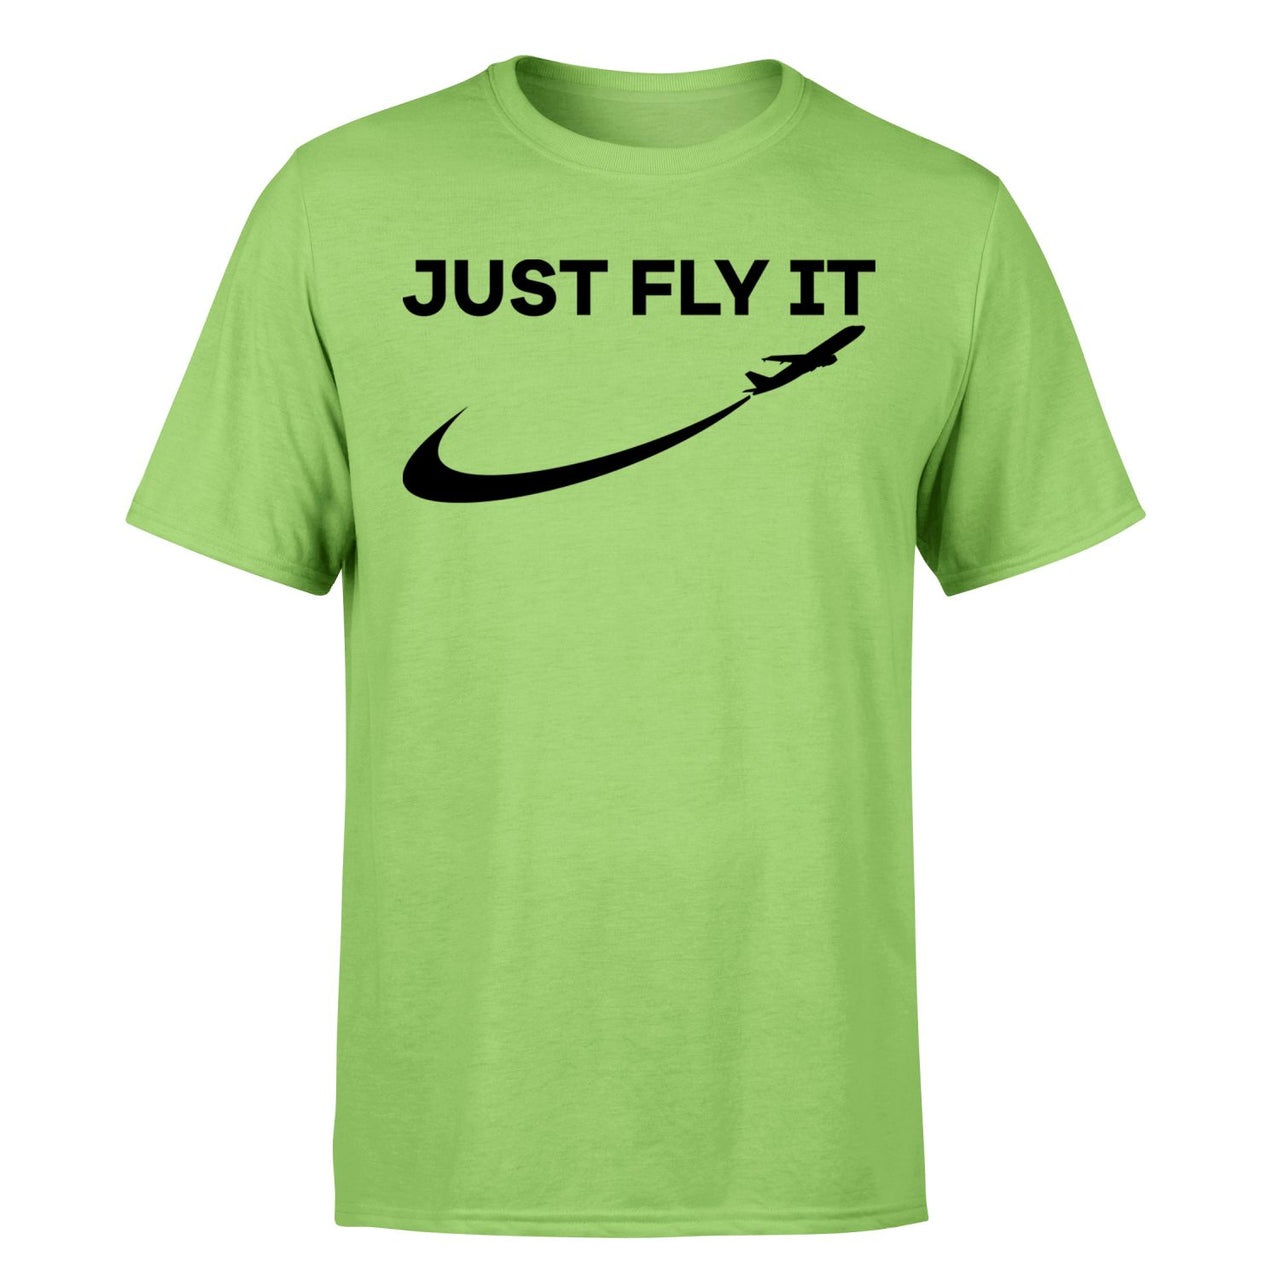 Just Fly It 2 Designed T-Shirts